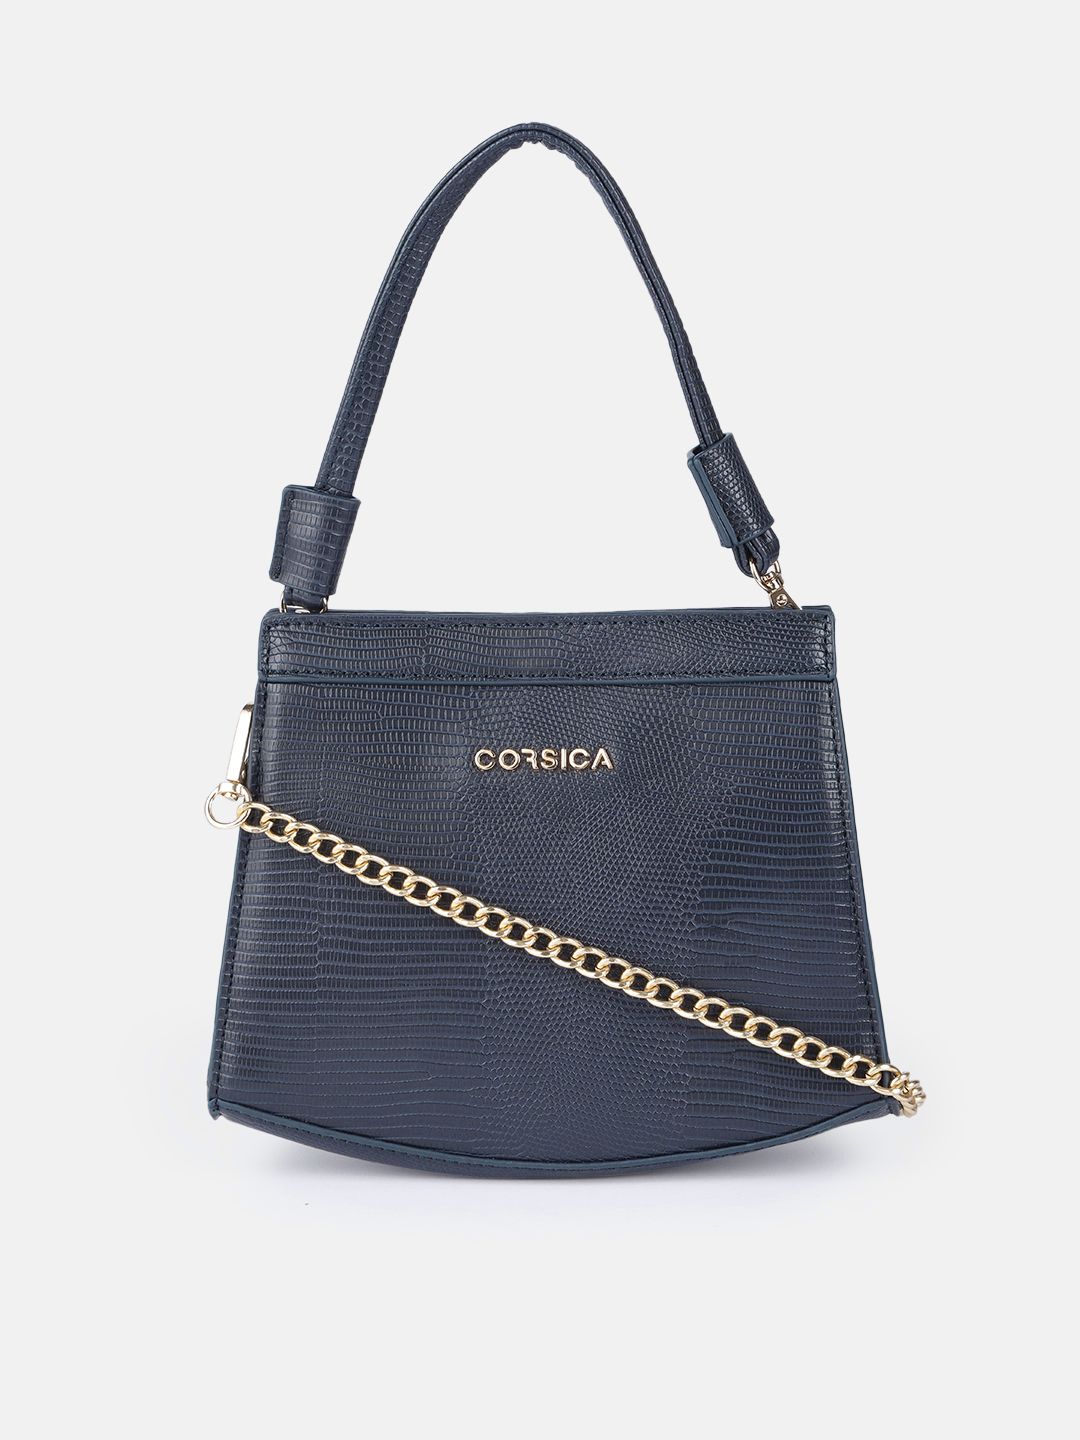 CORSICA Navy Blue Animal Textured Structured Hobo Bag Price in India